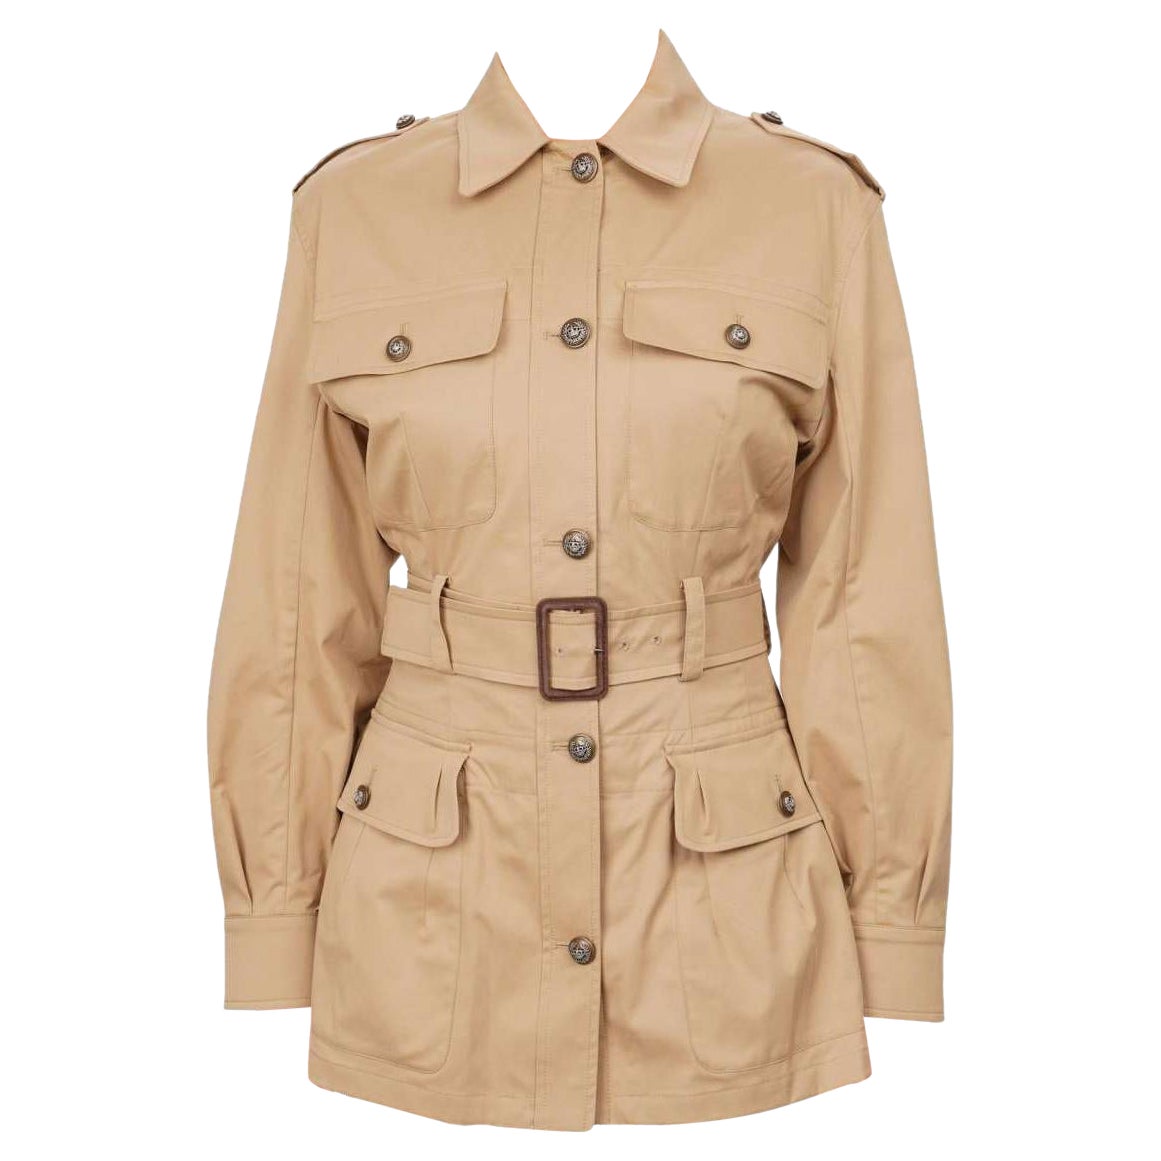 Dolce & Gabbana Metal Crown Buttons Trench Coat Safari Jacket Beige IT 44 For Sale